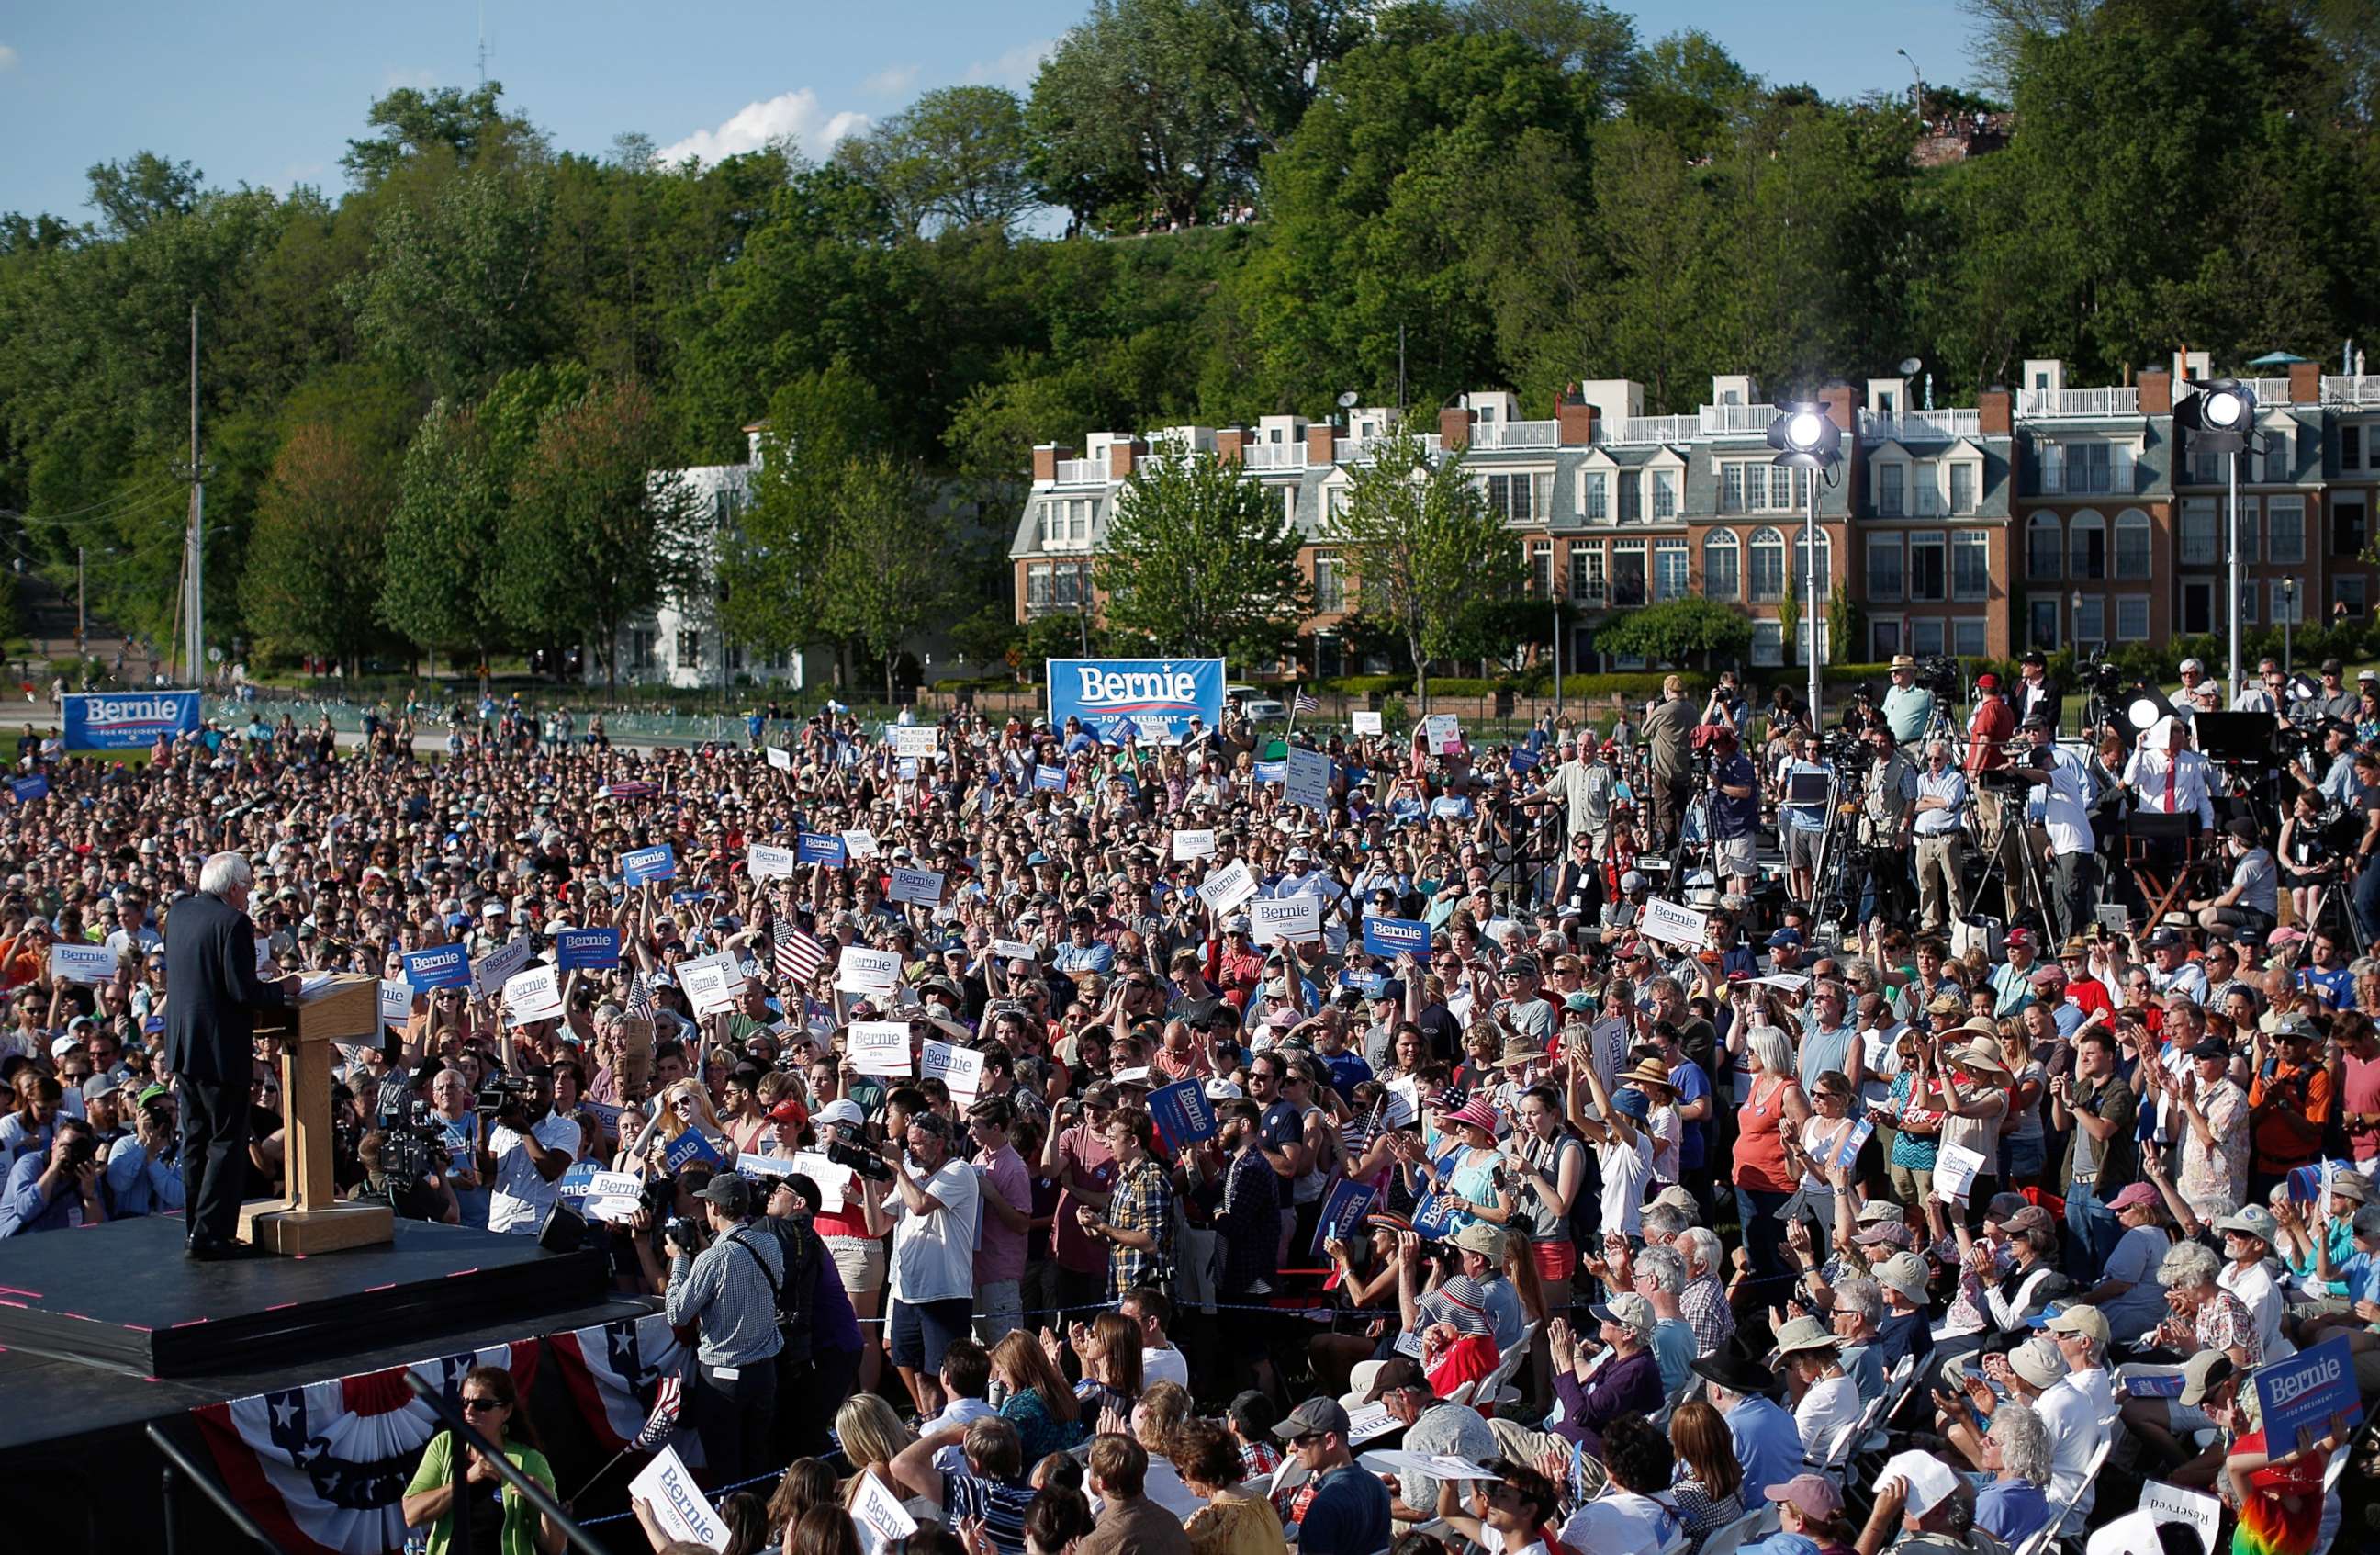 PHOTO: Sen. Bernie Sanders delivers remarks while announcing his candidacy for president at Waterfront Park, May 26, 2015 in Burlington, Vt.